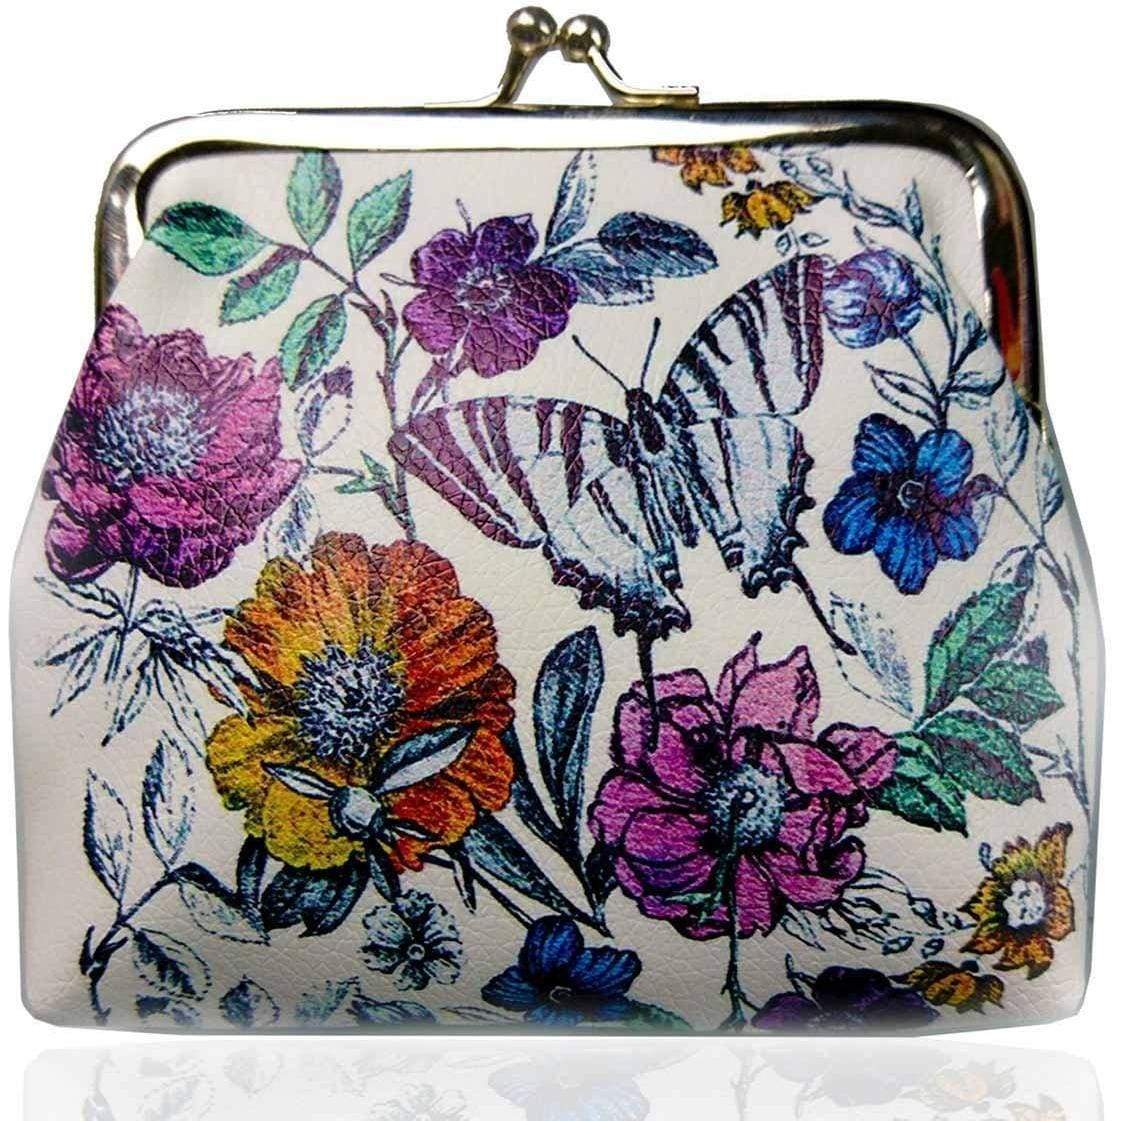 New Ladies Girls Butterfly Coin Purse Kiss Clasp Floral Clutch Womens Gift Novel - Large Coin Purse by Fashion Accessories